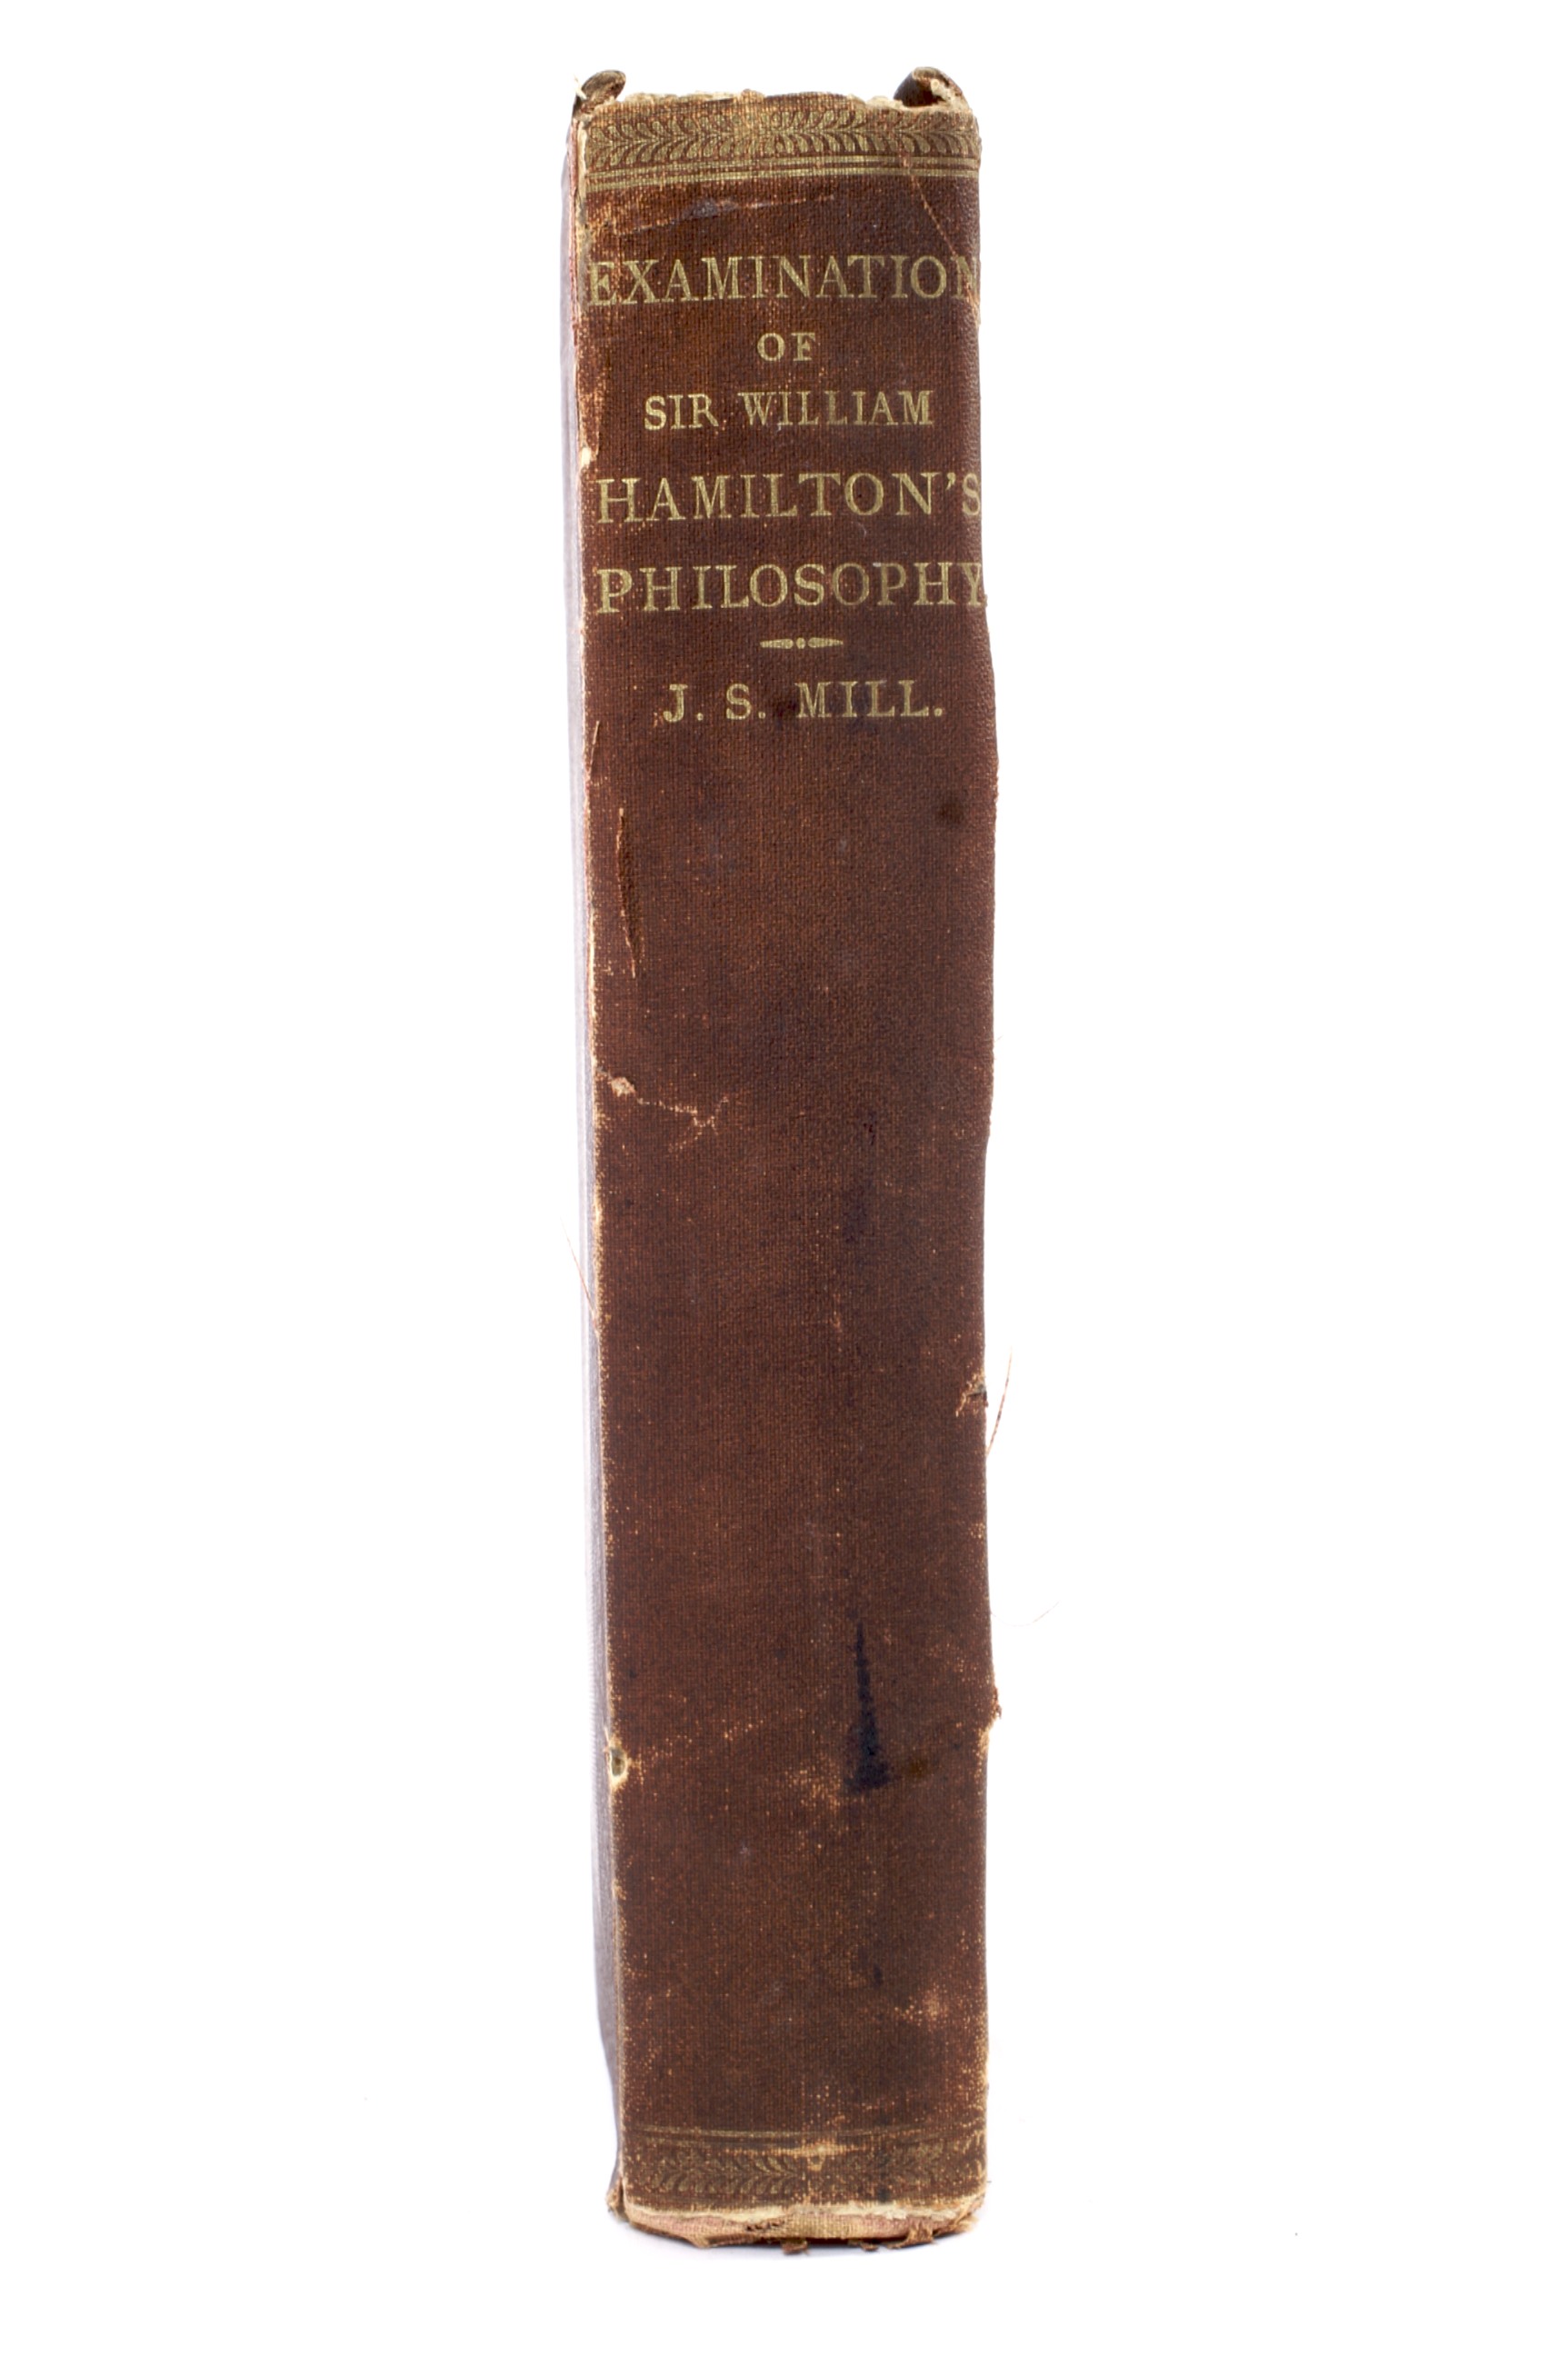 J S Mill, An Examination of Sir William Hamilton's Philosophy. - Image 2 of 3